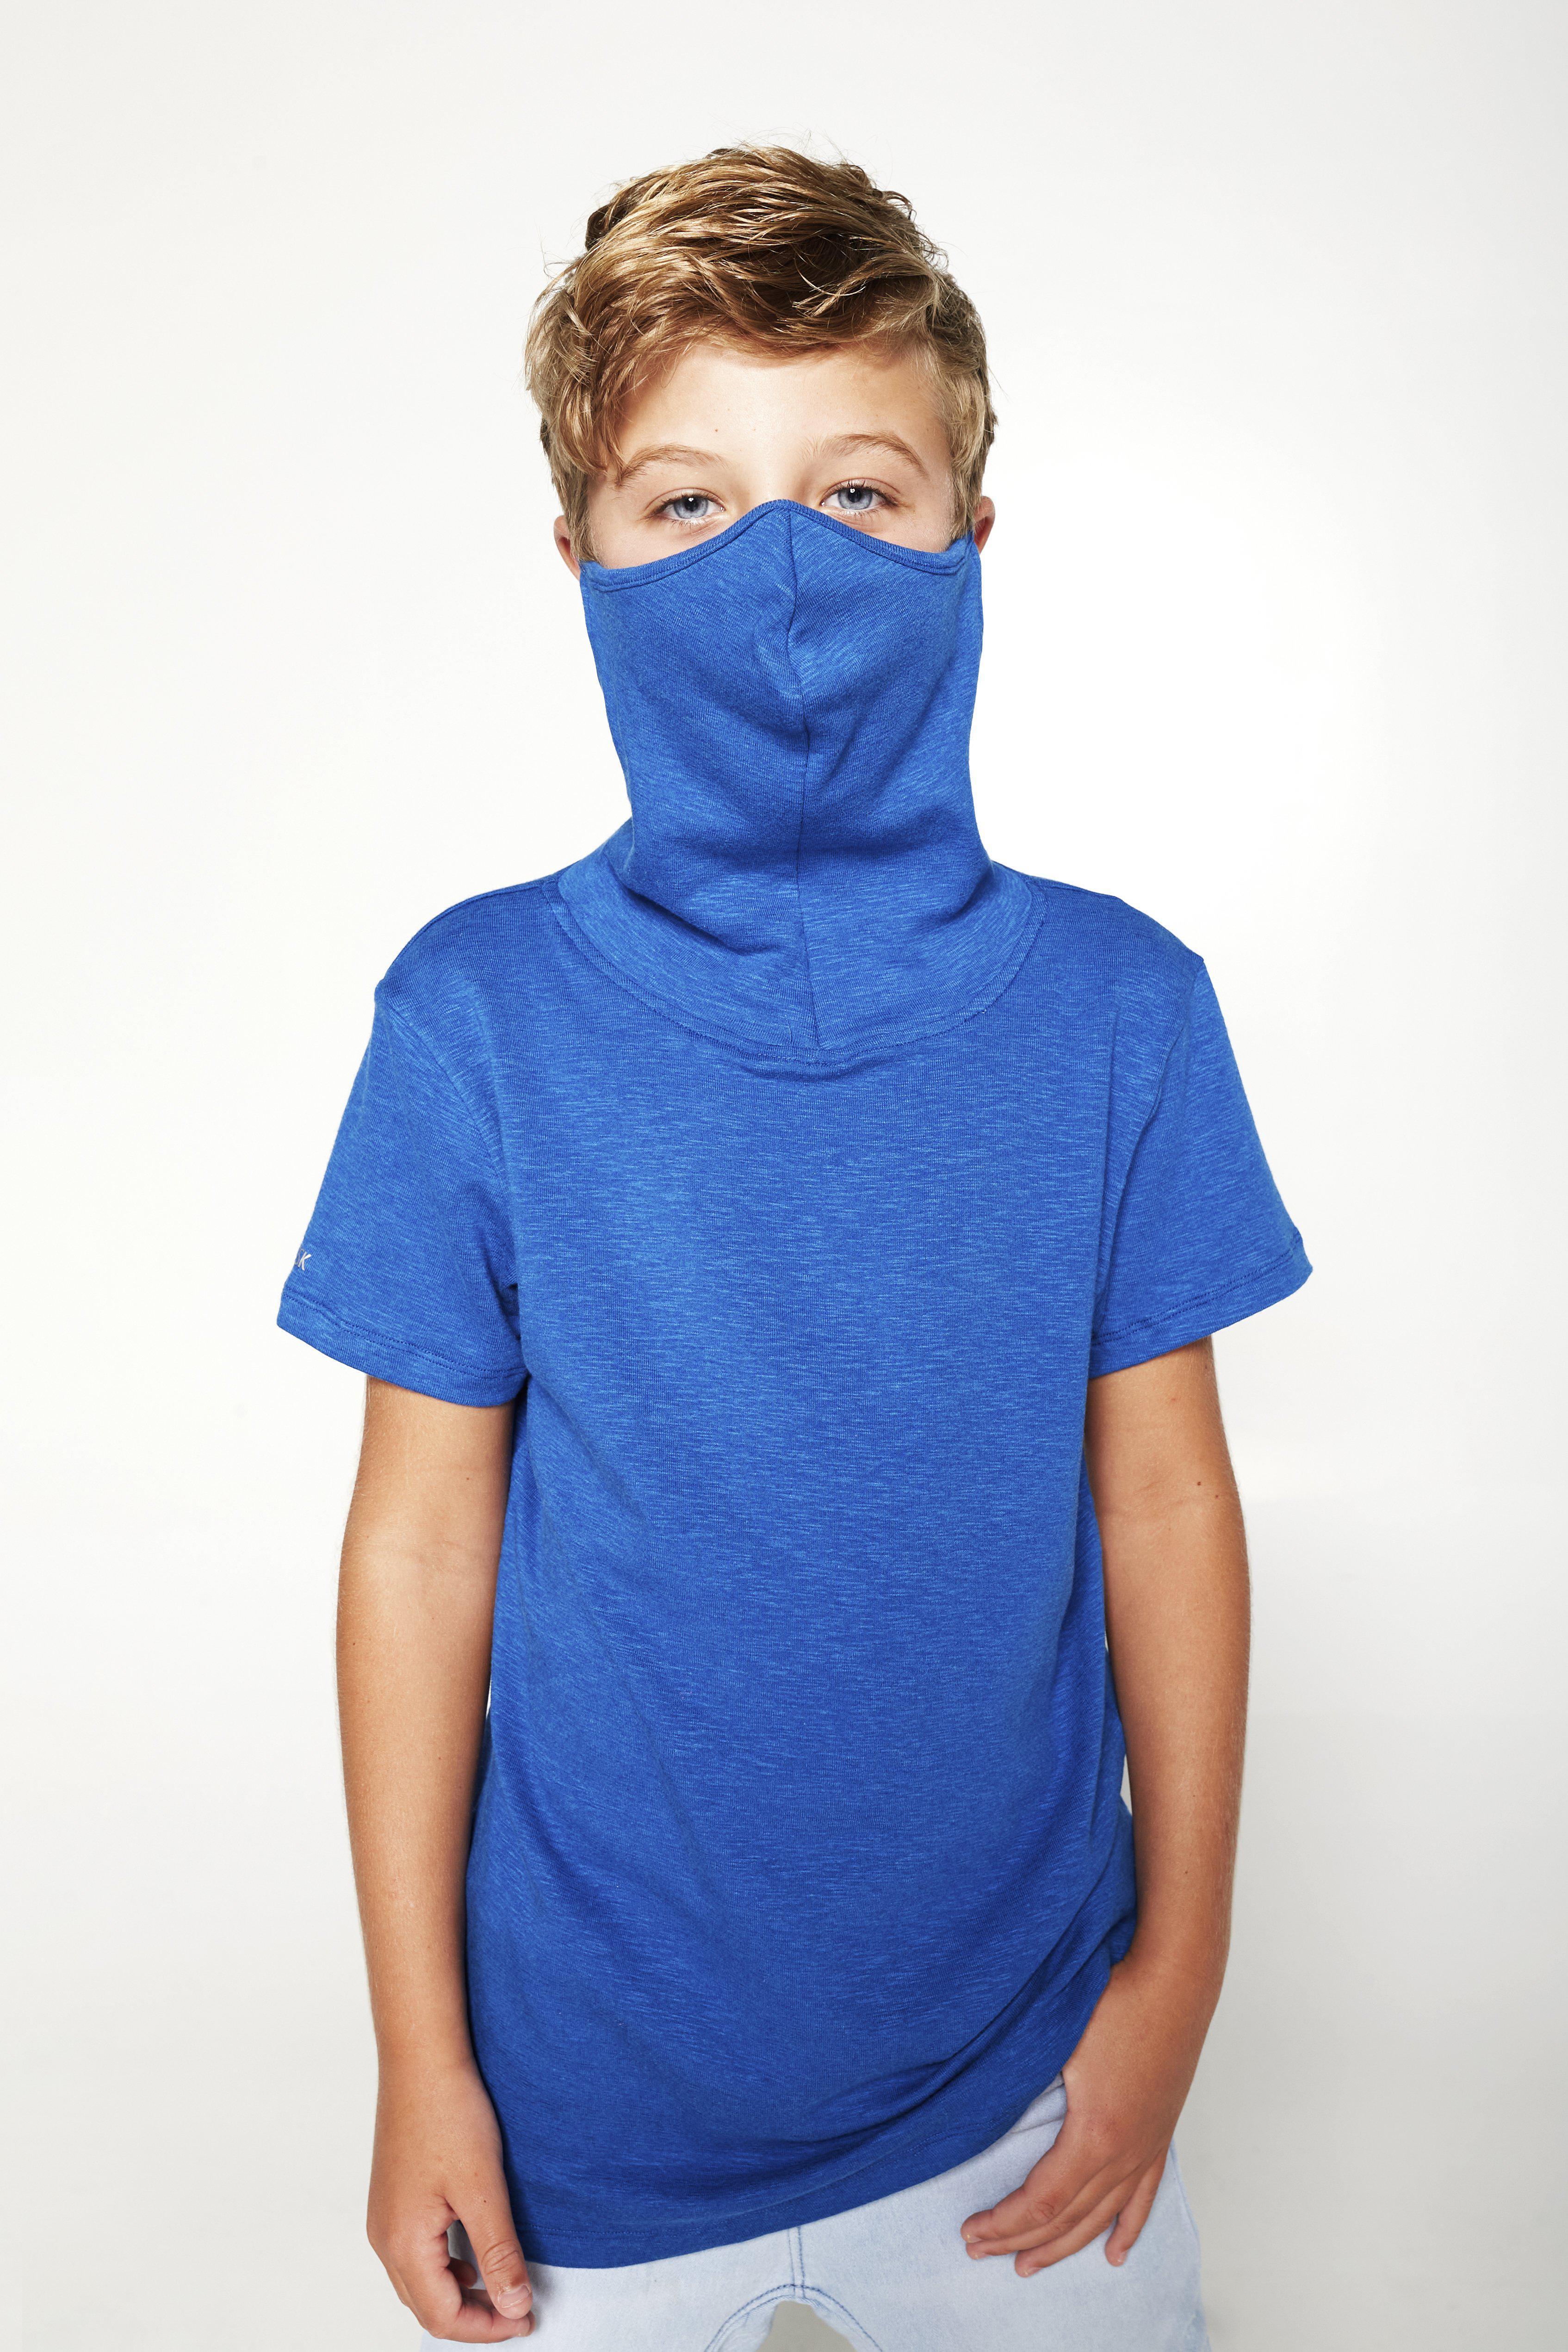 Kids Short Sleeve Royal Blue Shmask™ Earloop Face Mask for Kids and Adults